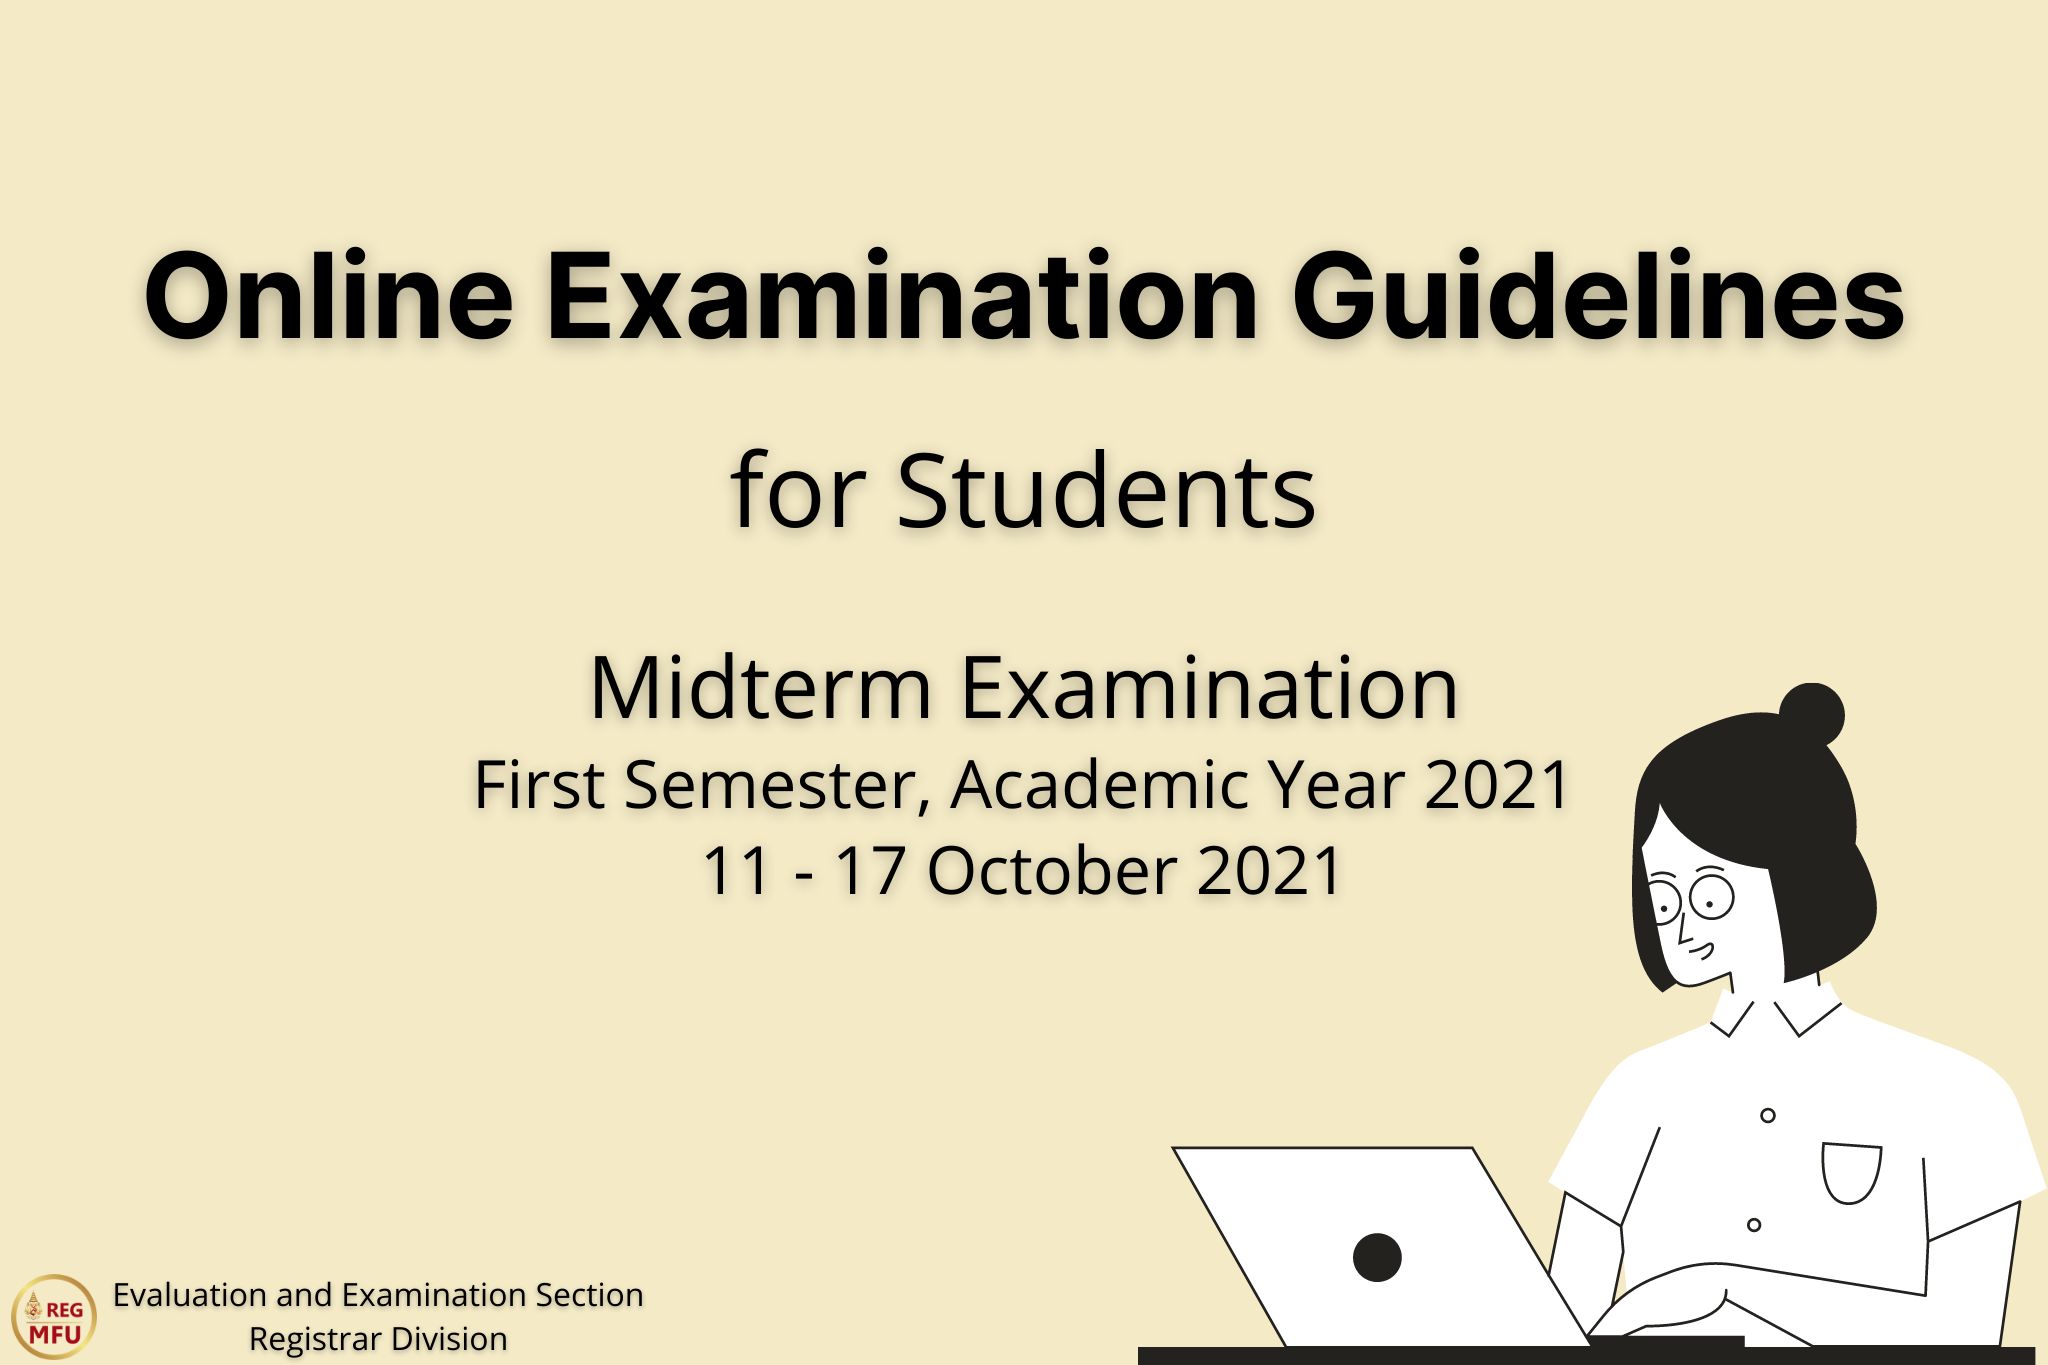 Guidelines for online examination preparation of midterm examination, First Semester, Academic Year 2021